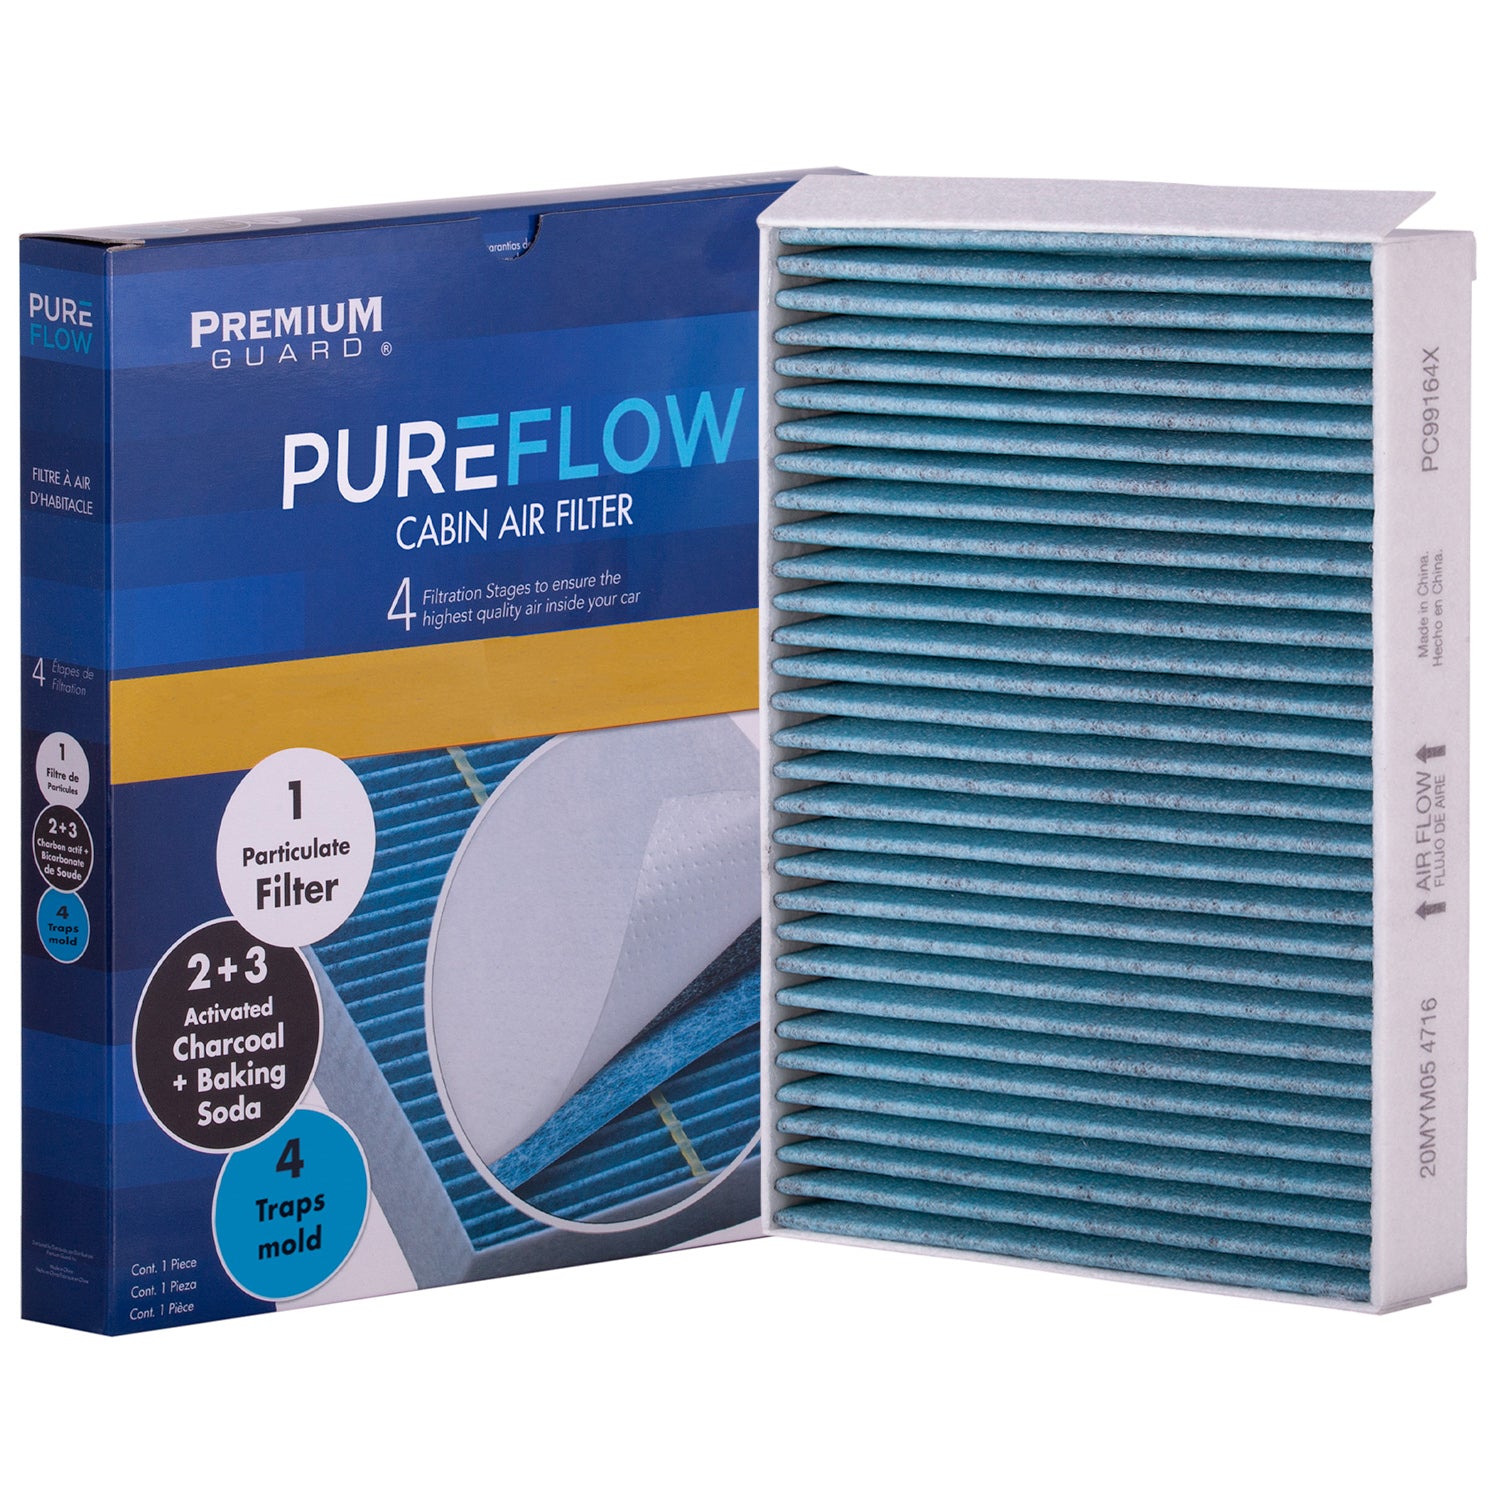 PUREFLOW 2020 Mercedes-Benz GLC63 AMG Cabin Air Filter with Antibacterial Technology, PC99164X